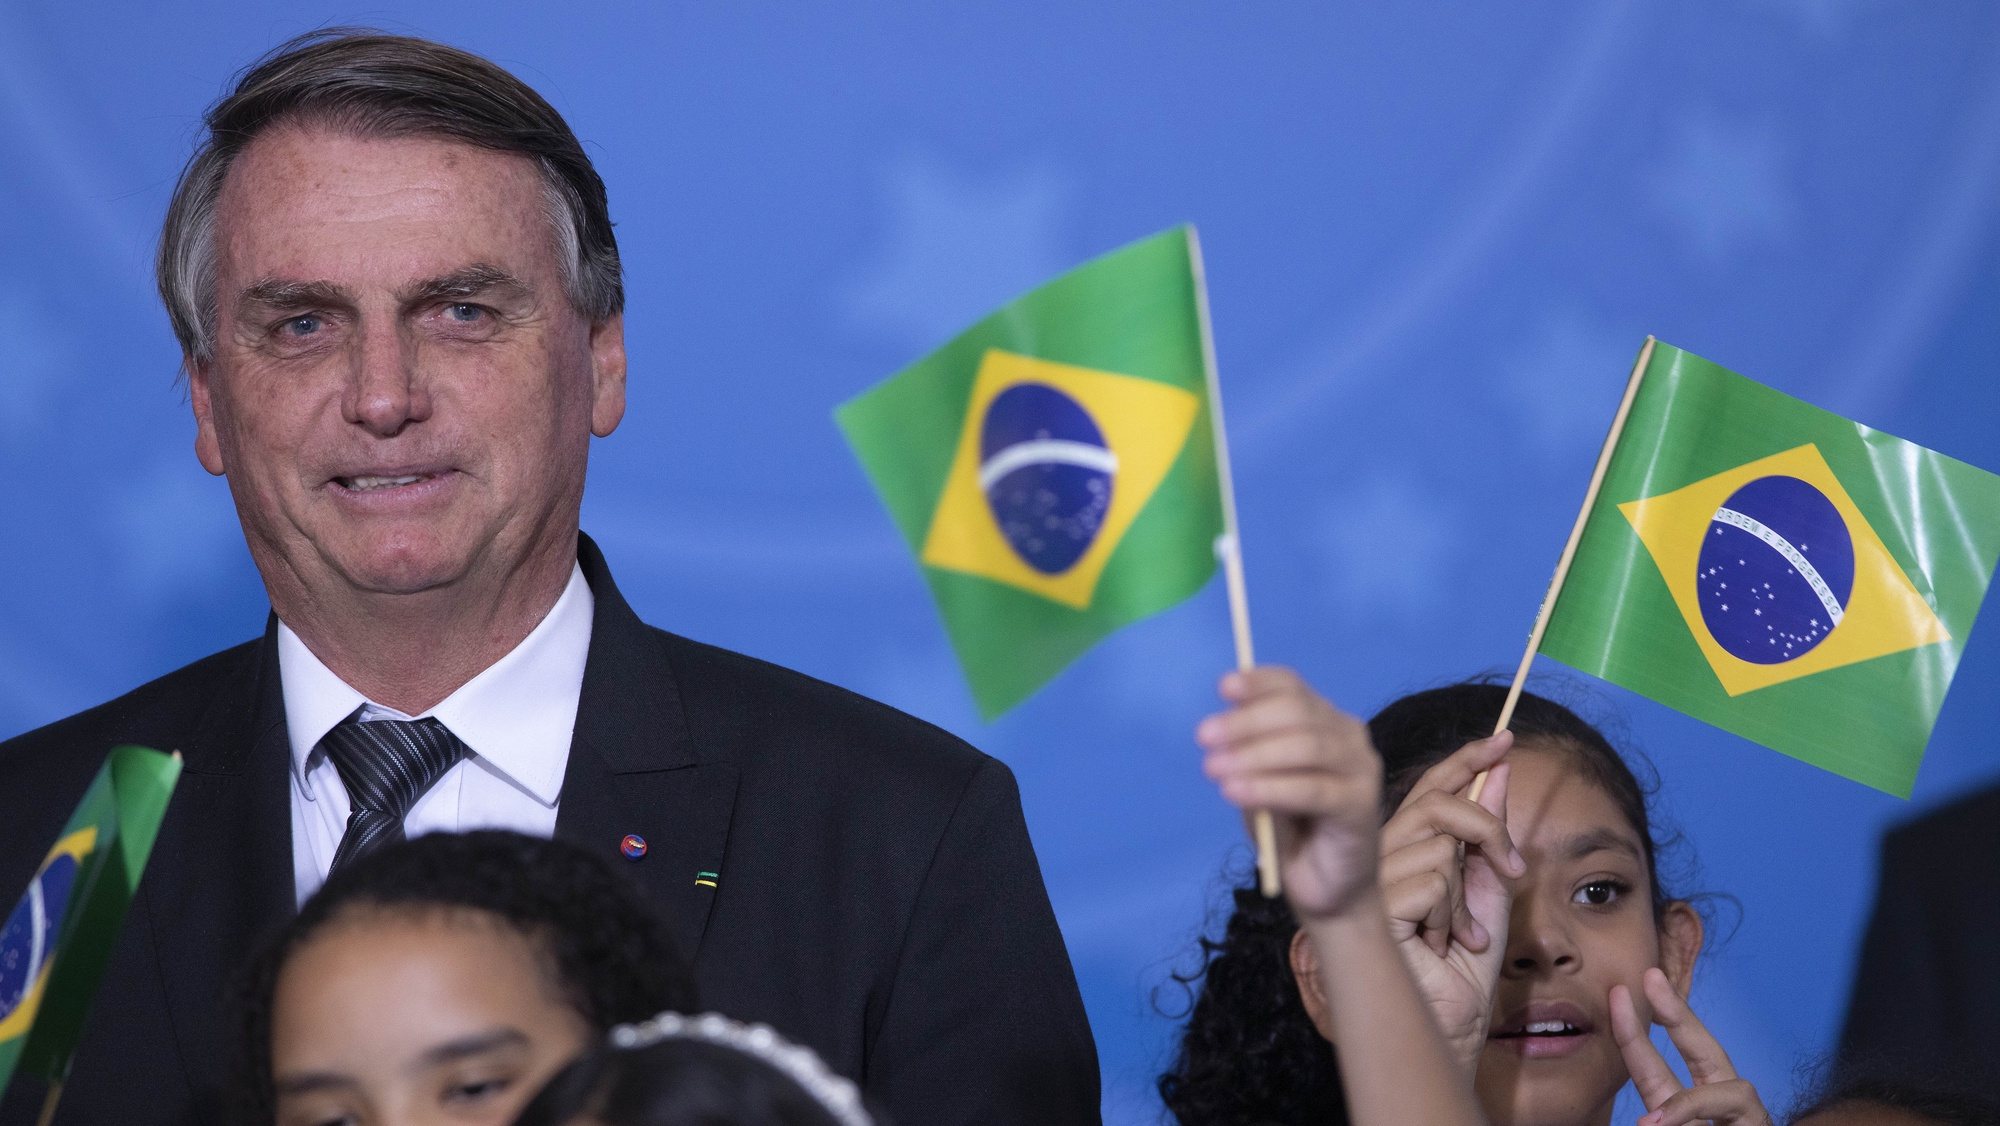 epa10135326 Brazilian President Jair Bolsonaro attends a ceremony marking 200 years of independence from Portugal, at the Palacio do Planalto in Brasilia, Brazil, 23 August 2022. Brazilian President Jair Bolsonaro was presented on loan by the city of Porto, Portugal with a relic containing the heart of Emperor Pedro I, who declared Brazilian independence from the crown of Portugal in 1822.  EPA/Joedson Alves